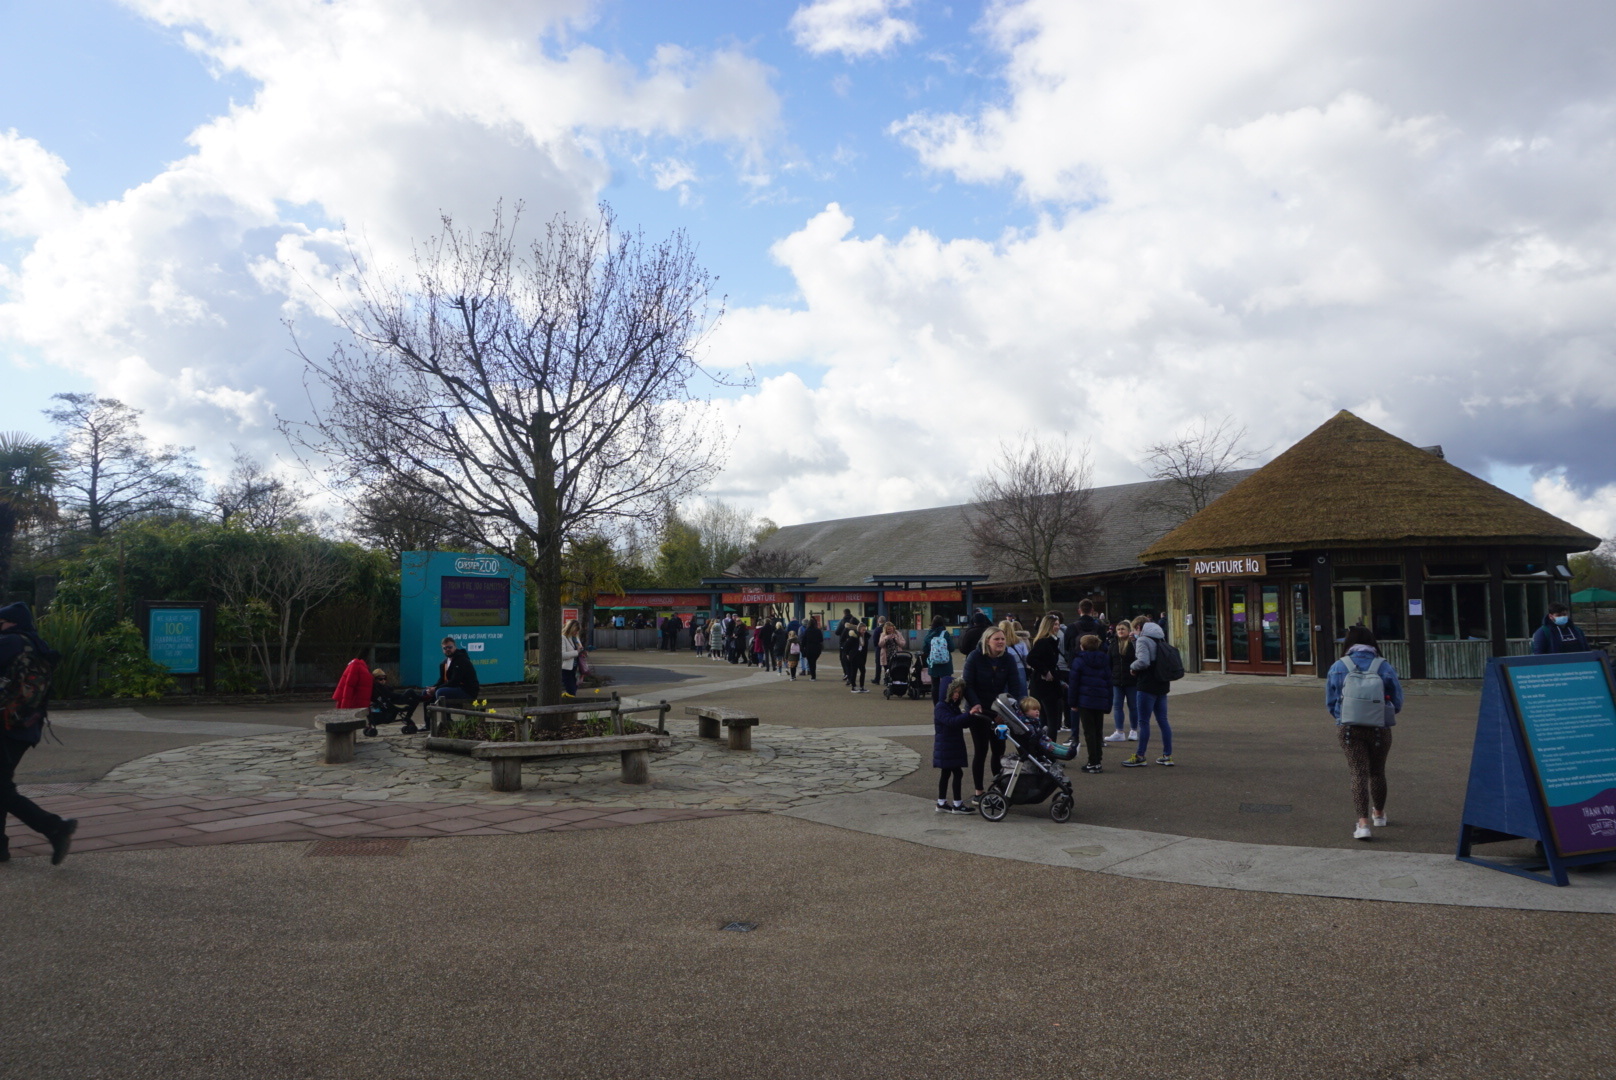 Chester Zoo welcomes back visitors for the first time in over three months.